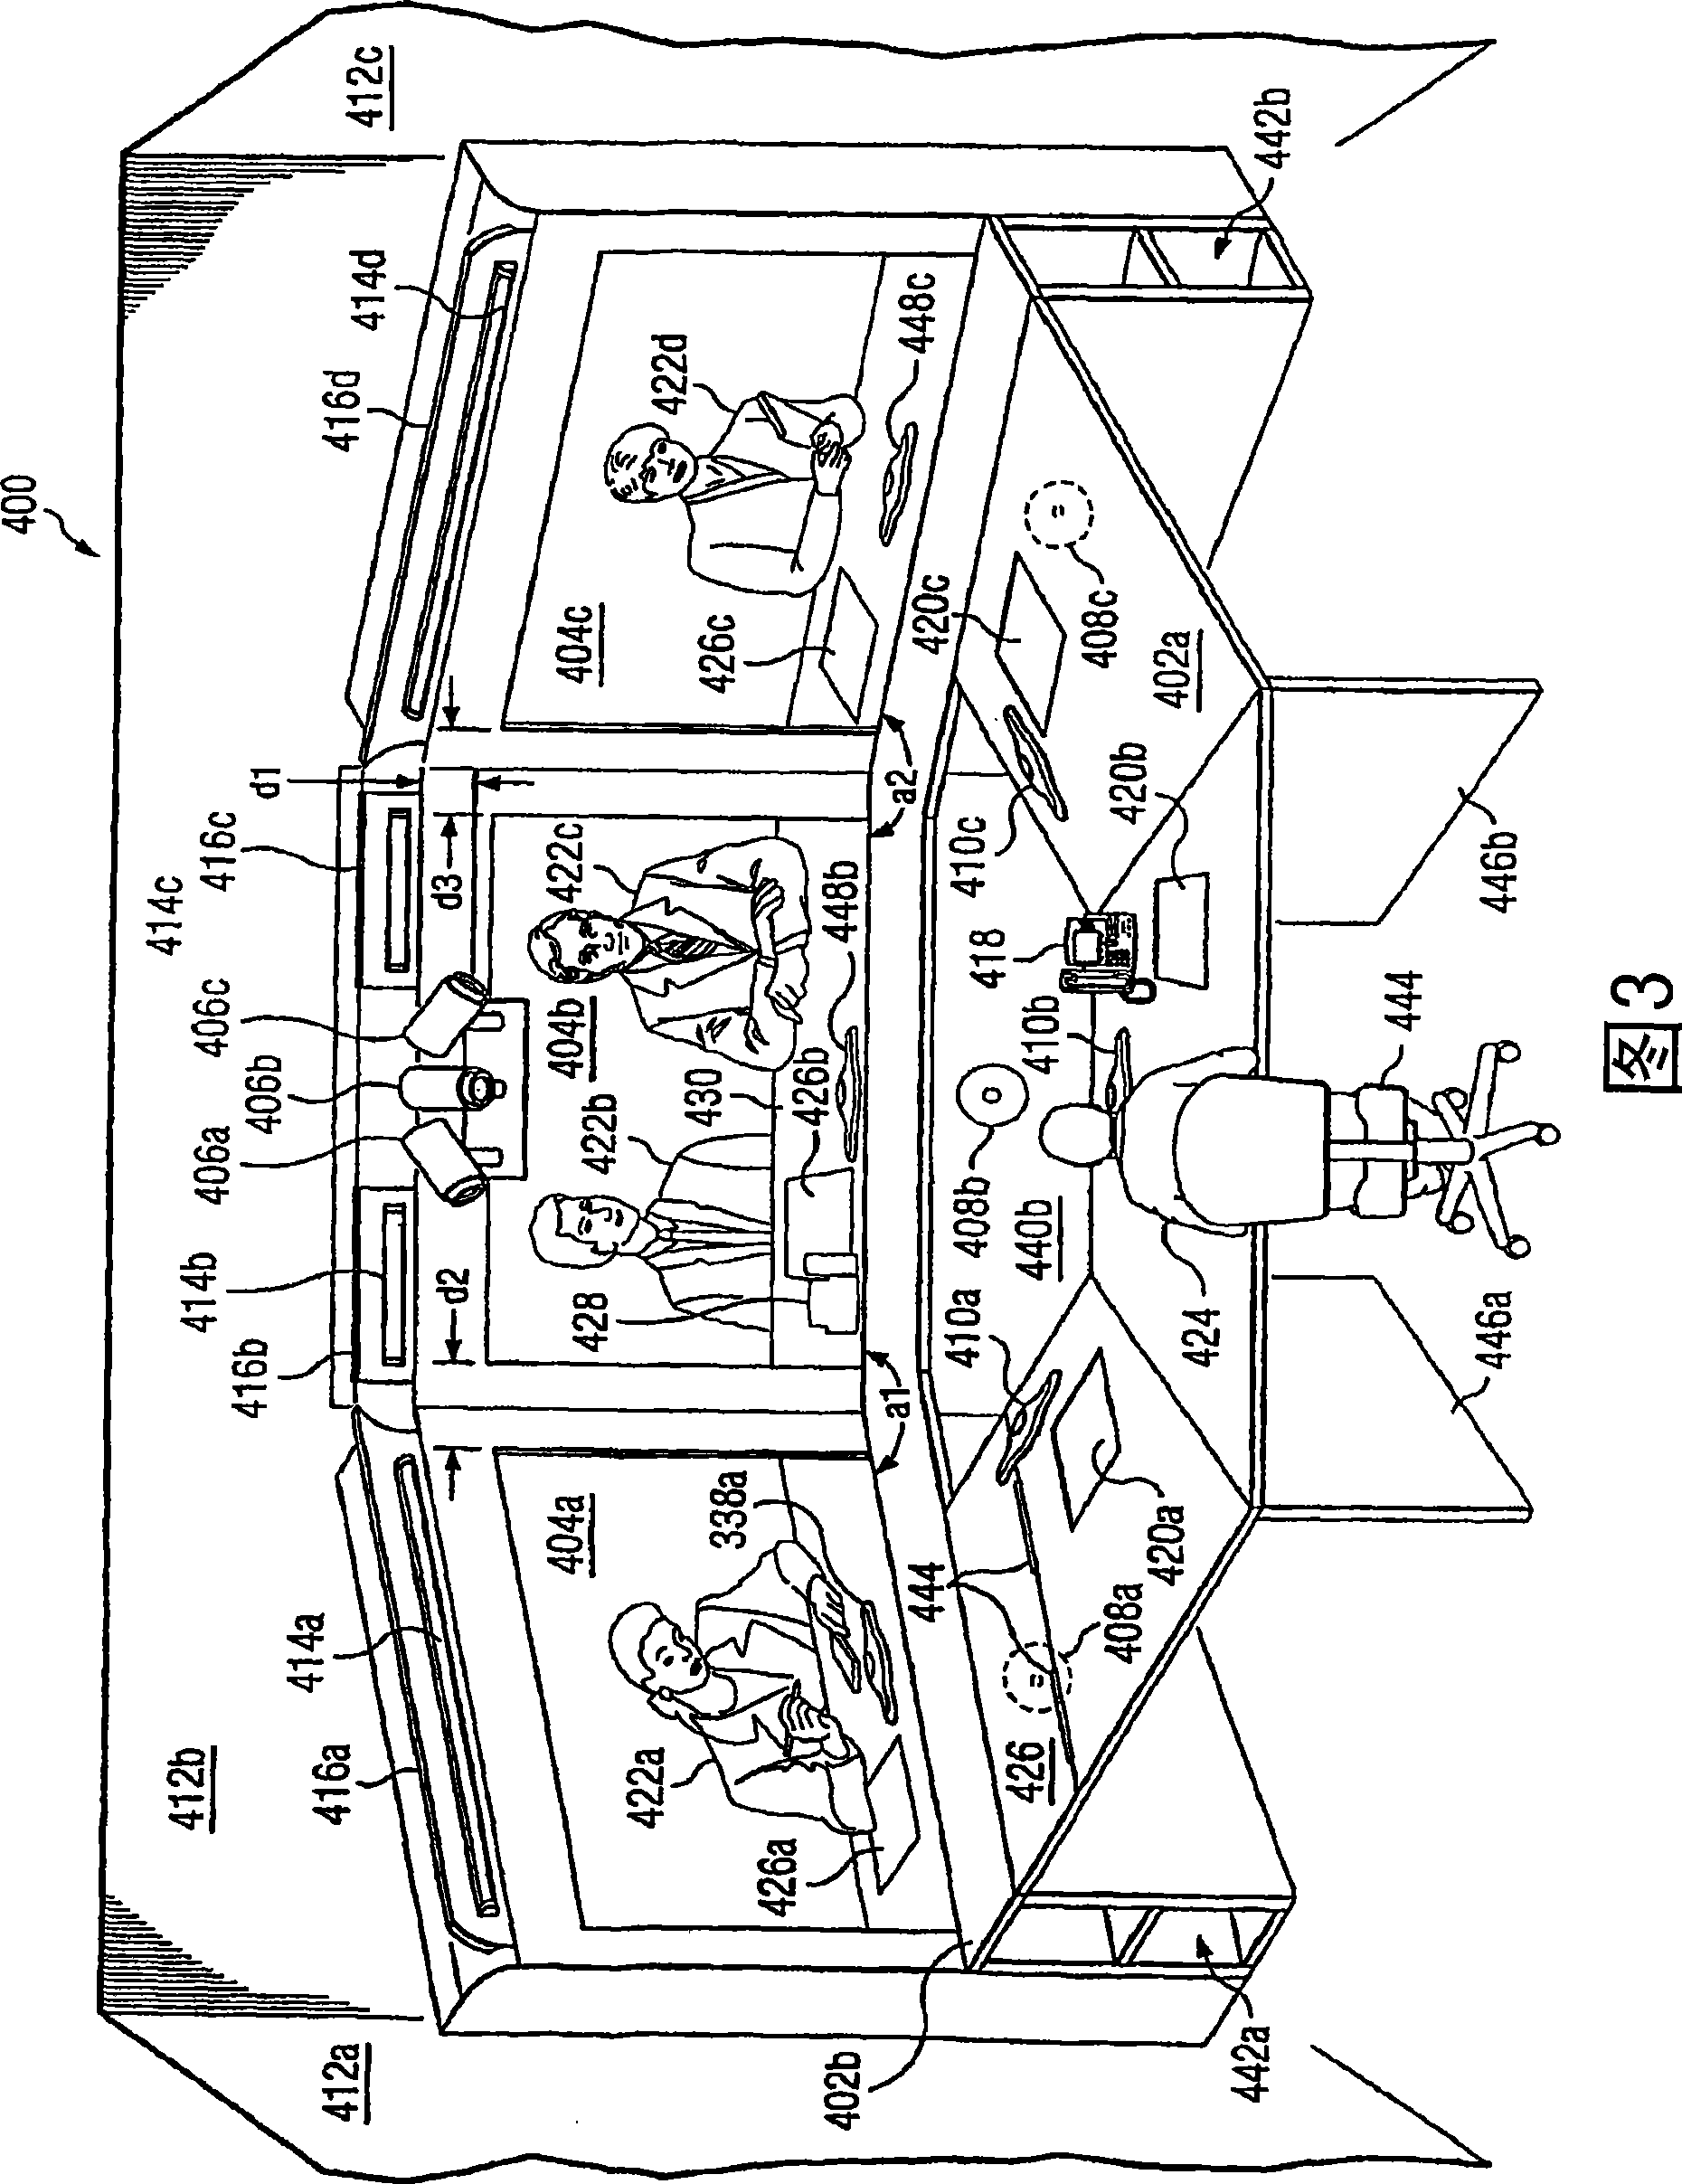 System and method for providing location specific sound in a telepresence system